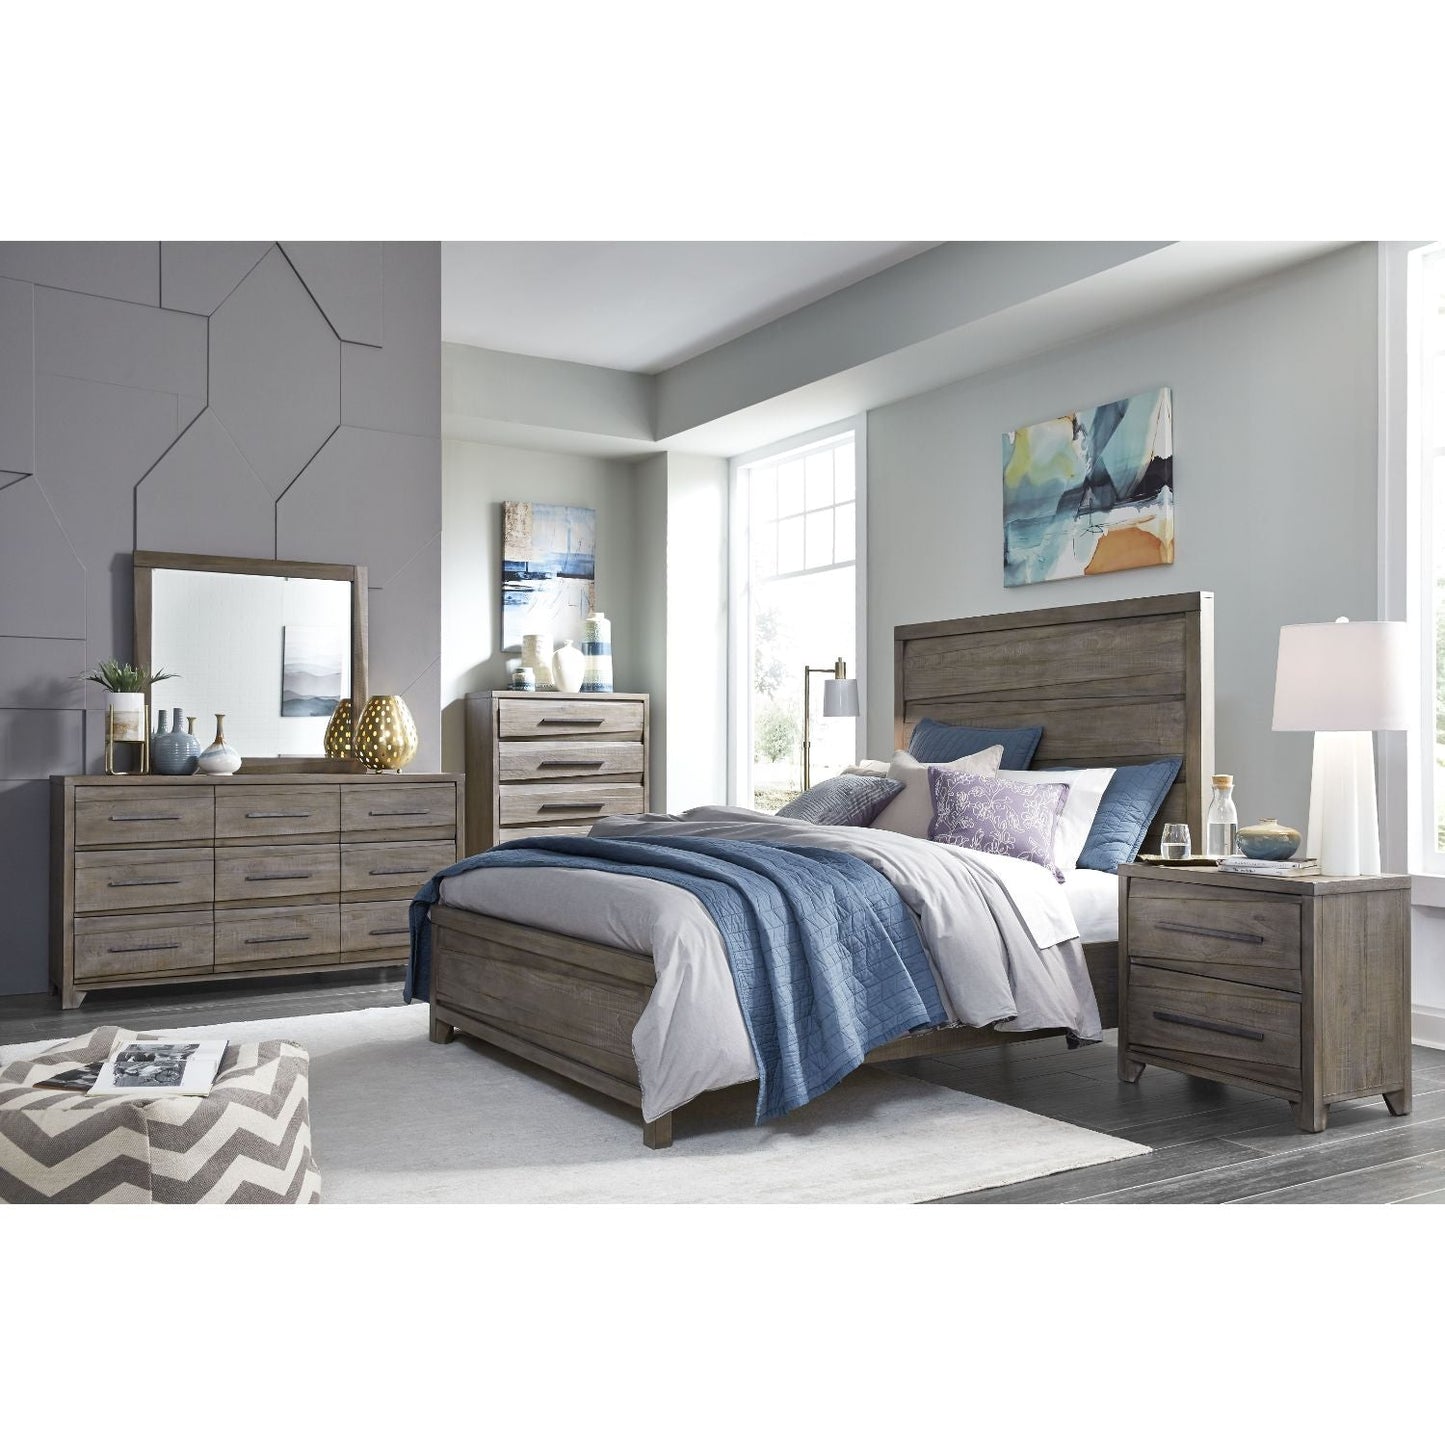 Modus Hearst Solid Wood Five Drawer Chest in Sahara Tan